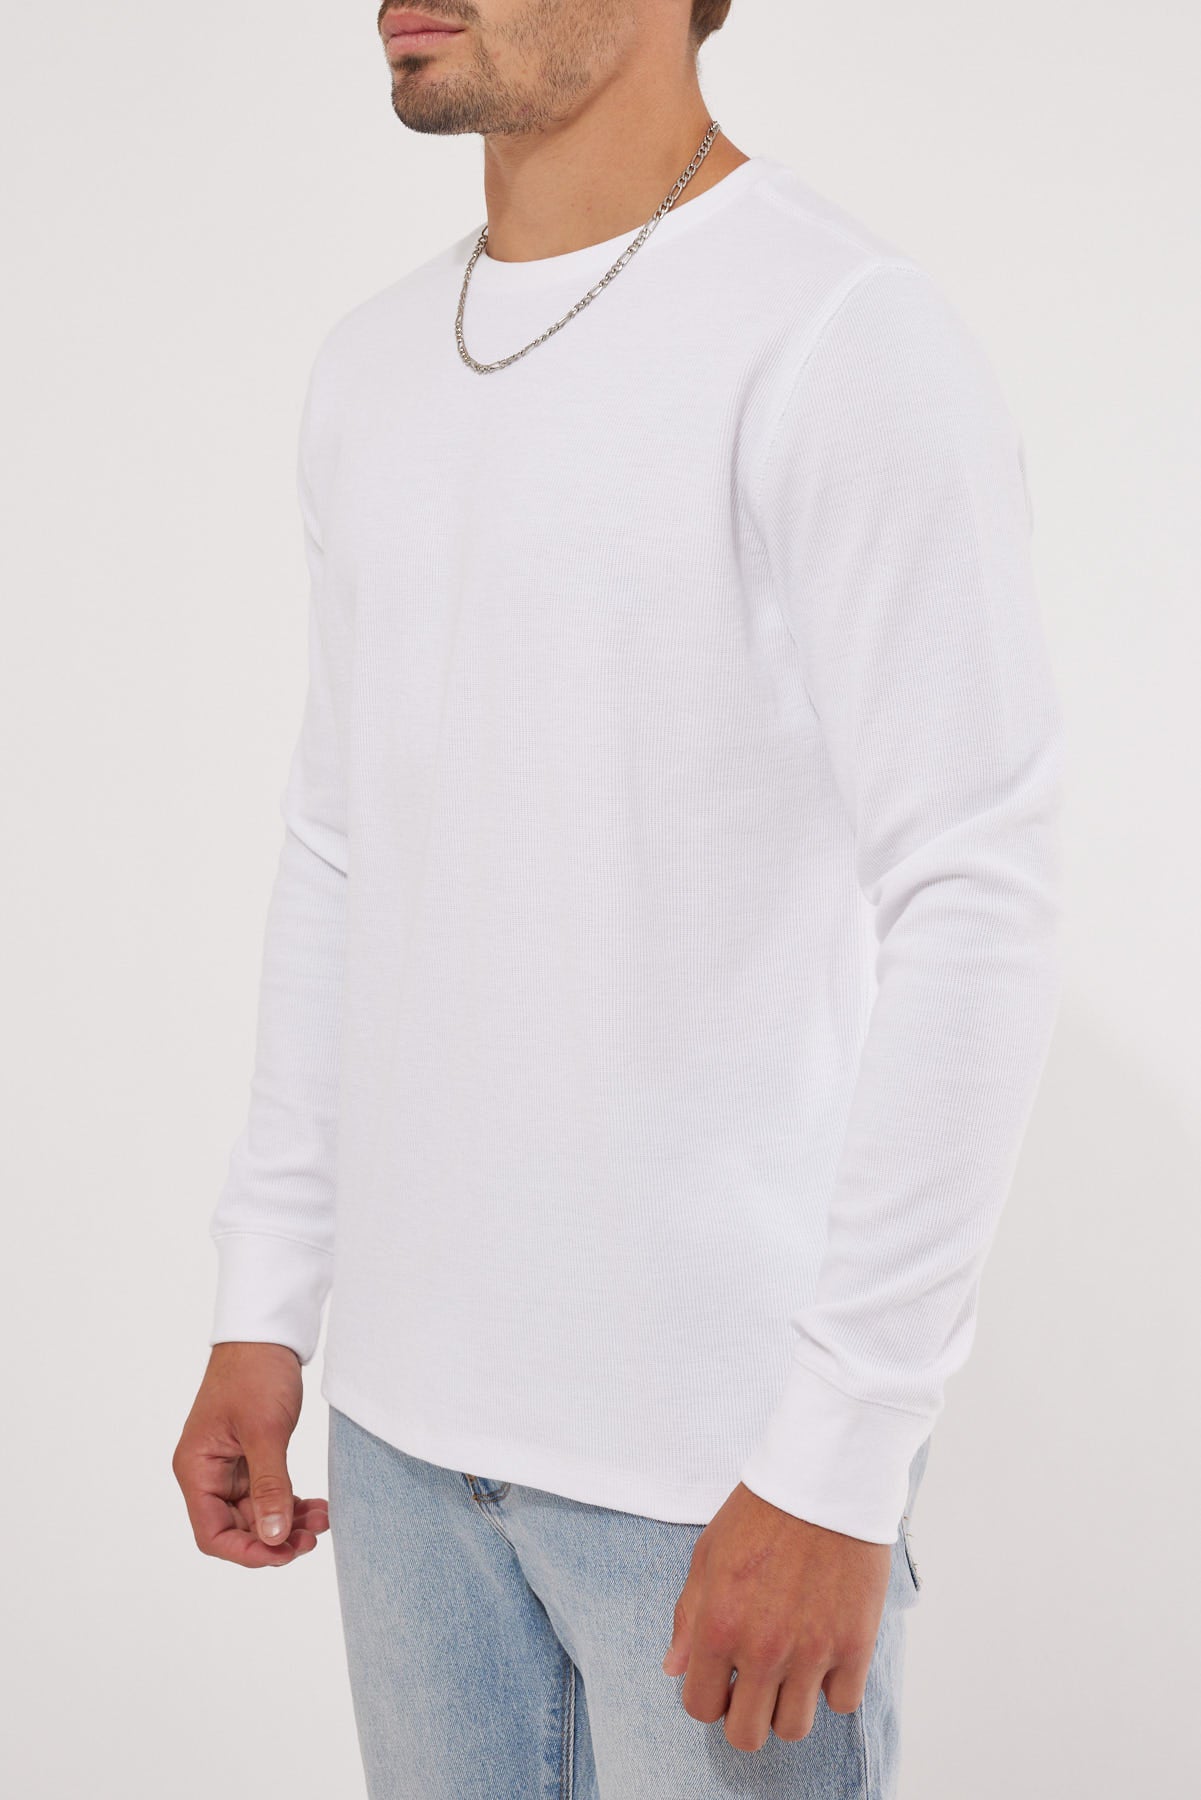 Academy Brand Workers Crew White